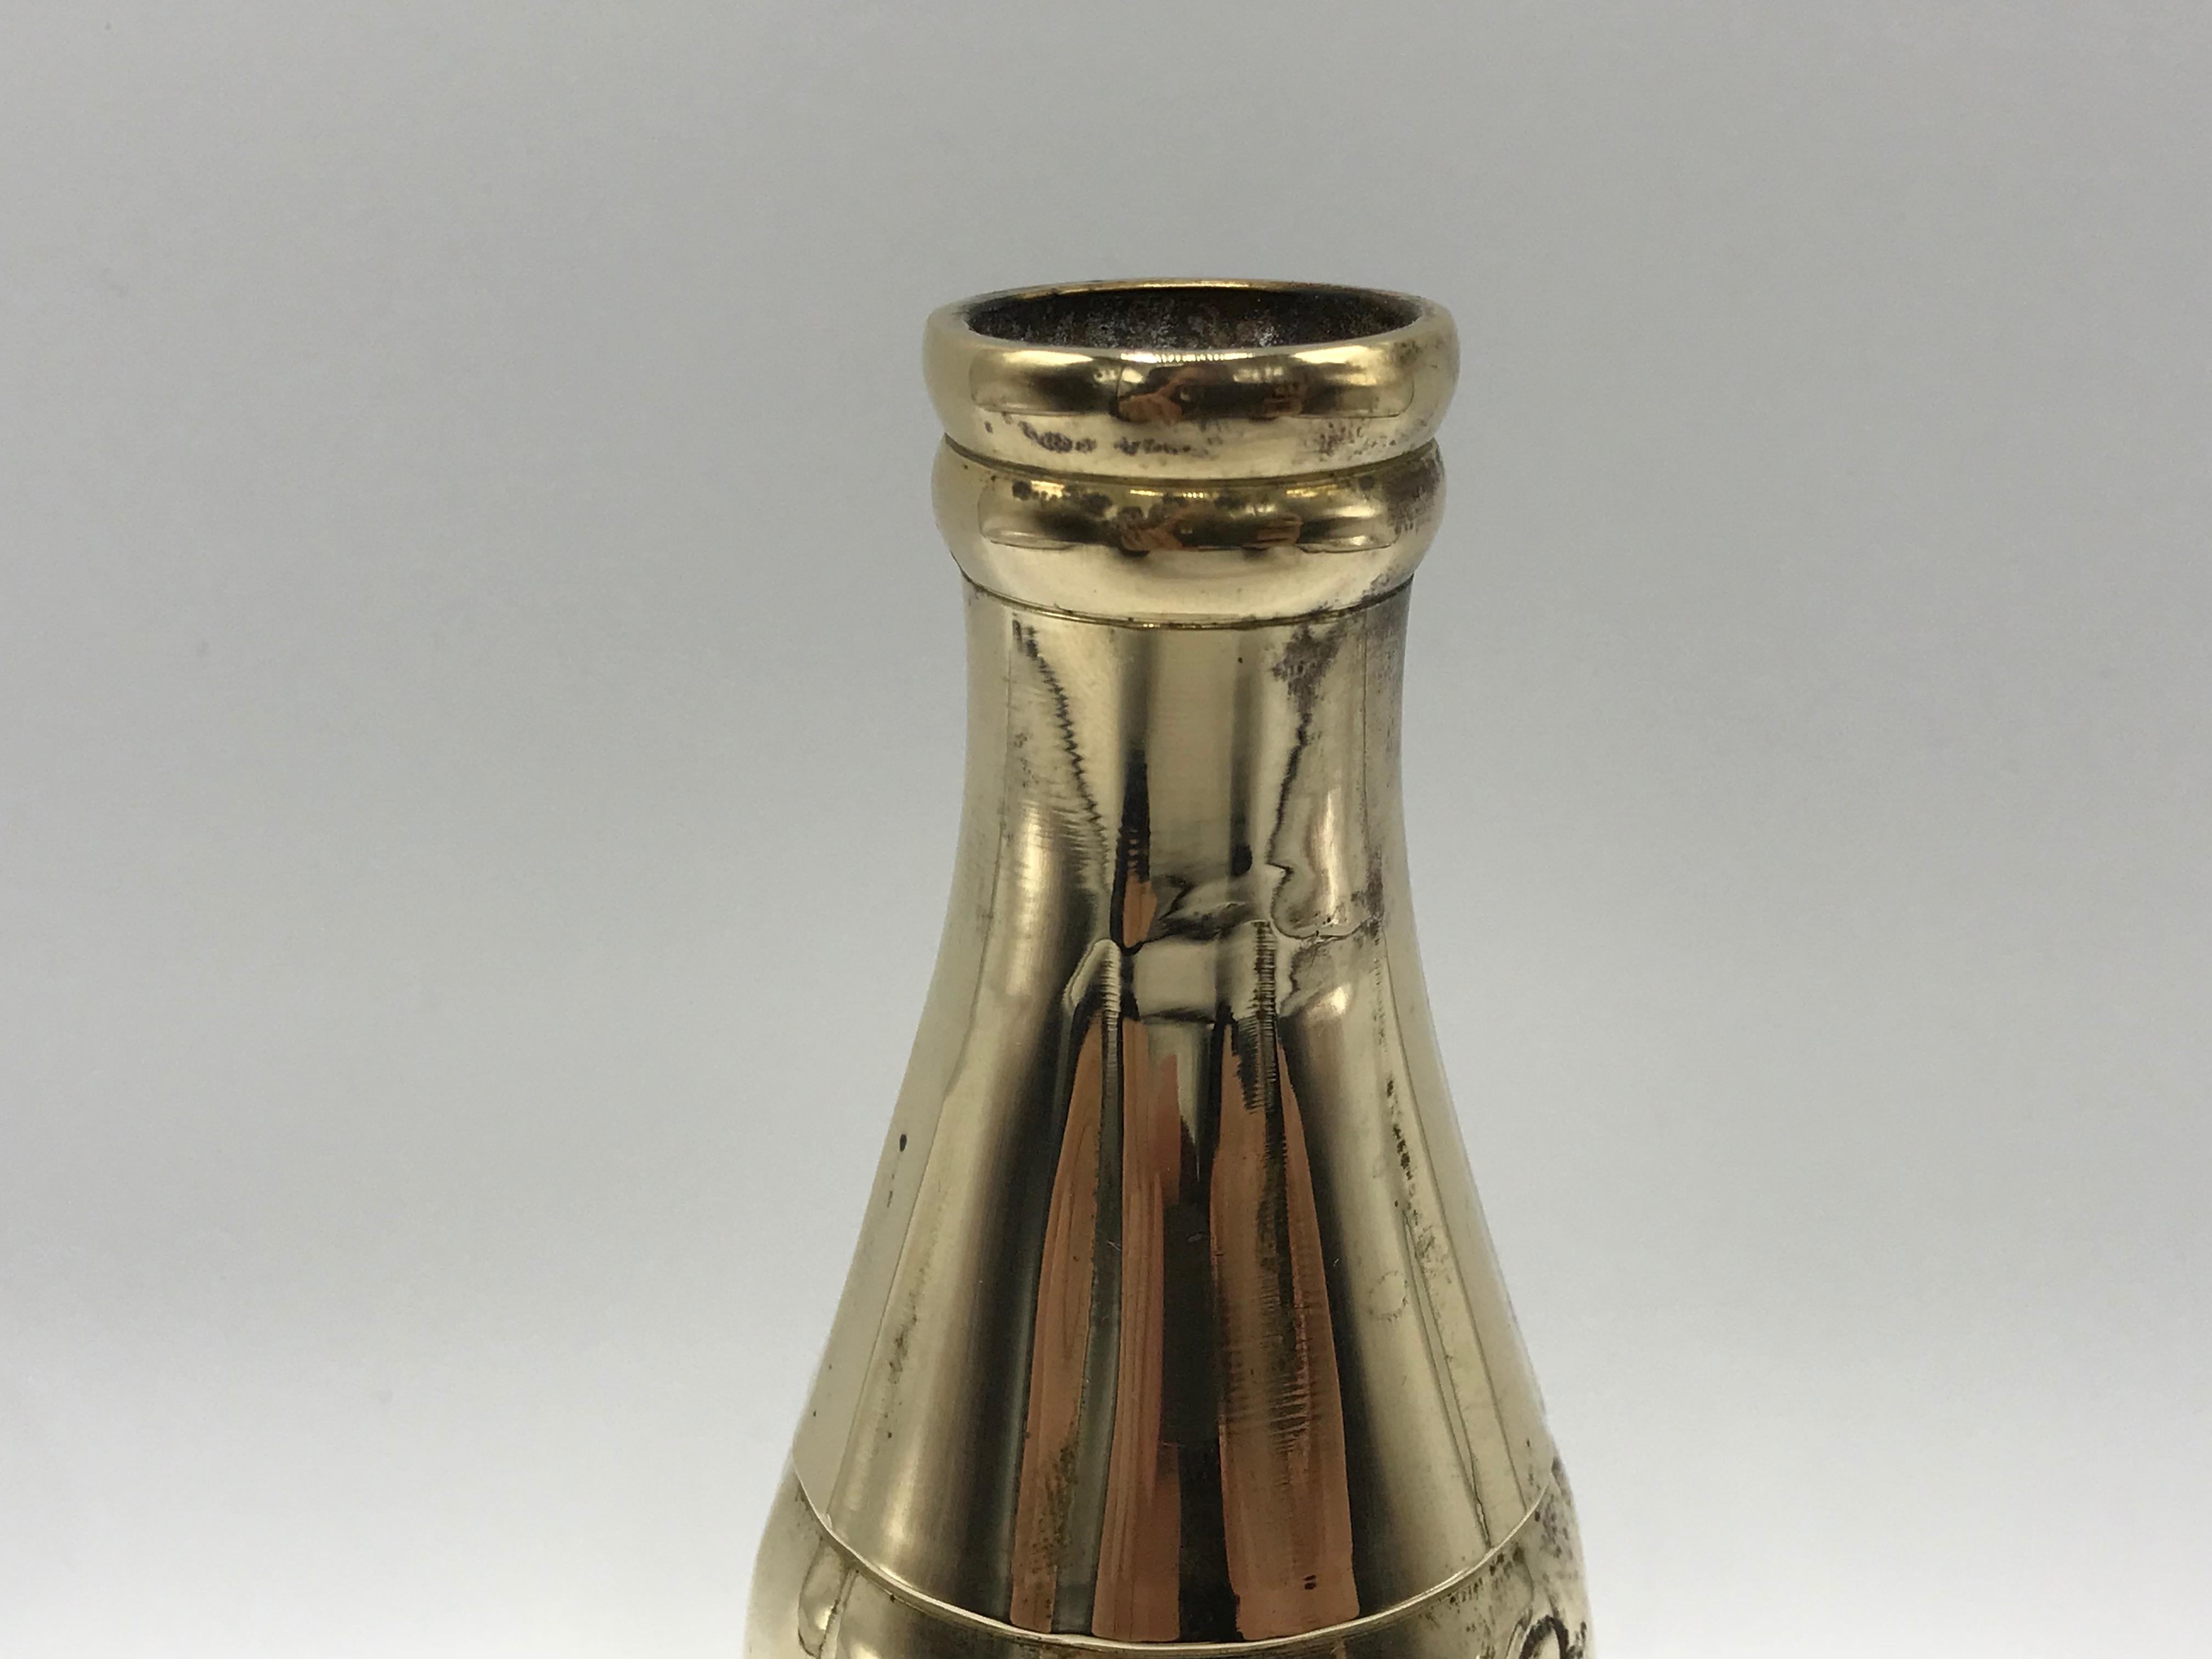 Offered is a 1970s polished-brass Coca-Cola bottle sculpture. The novelty piece has been crafted to replicate the vintage coke glass bottles.